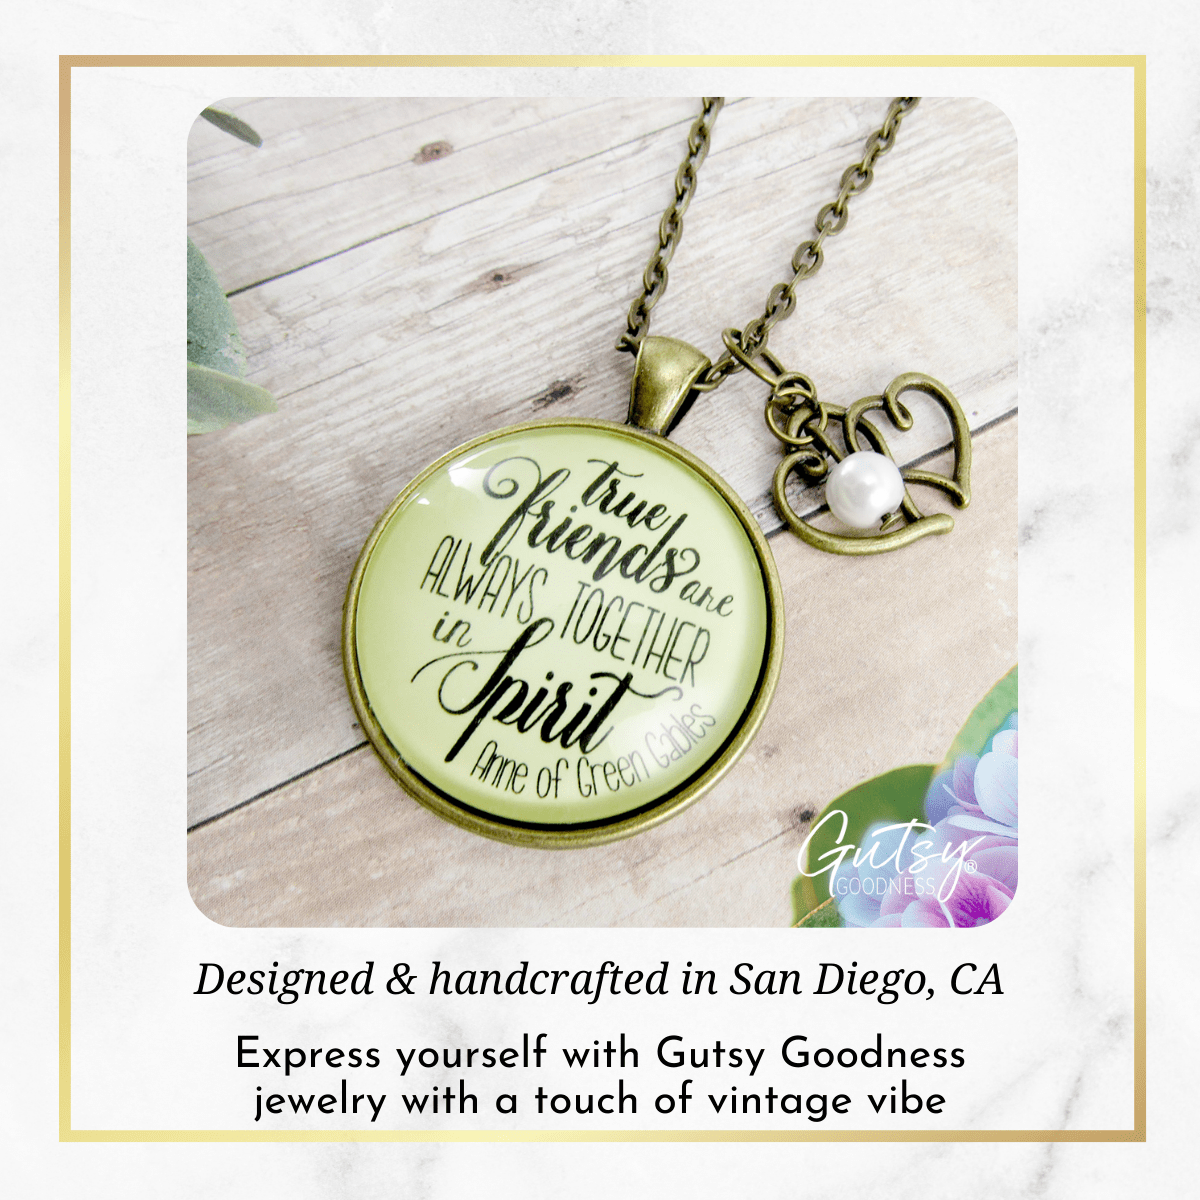 Gutsy Goodness True Friends are Always Together Necklace BFF Literature Quote - Gutsy Goodness Handmade Jewelry;True Friends Are Always Together Necklace Bff Literature Quote - Gutsy Goodness Handmade Jewelry Gifts